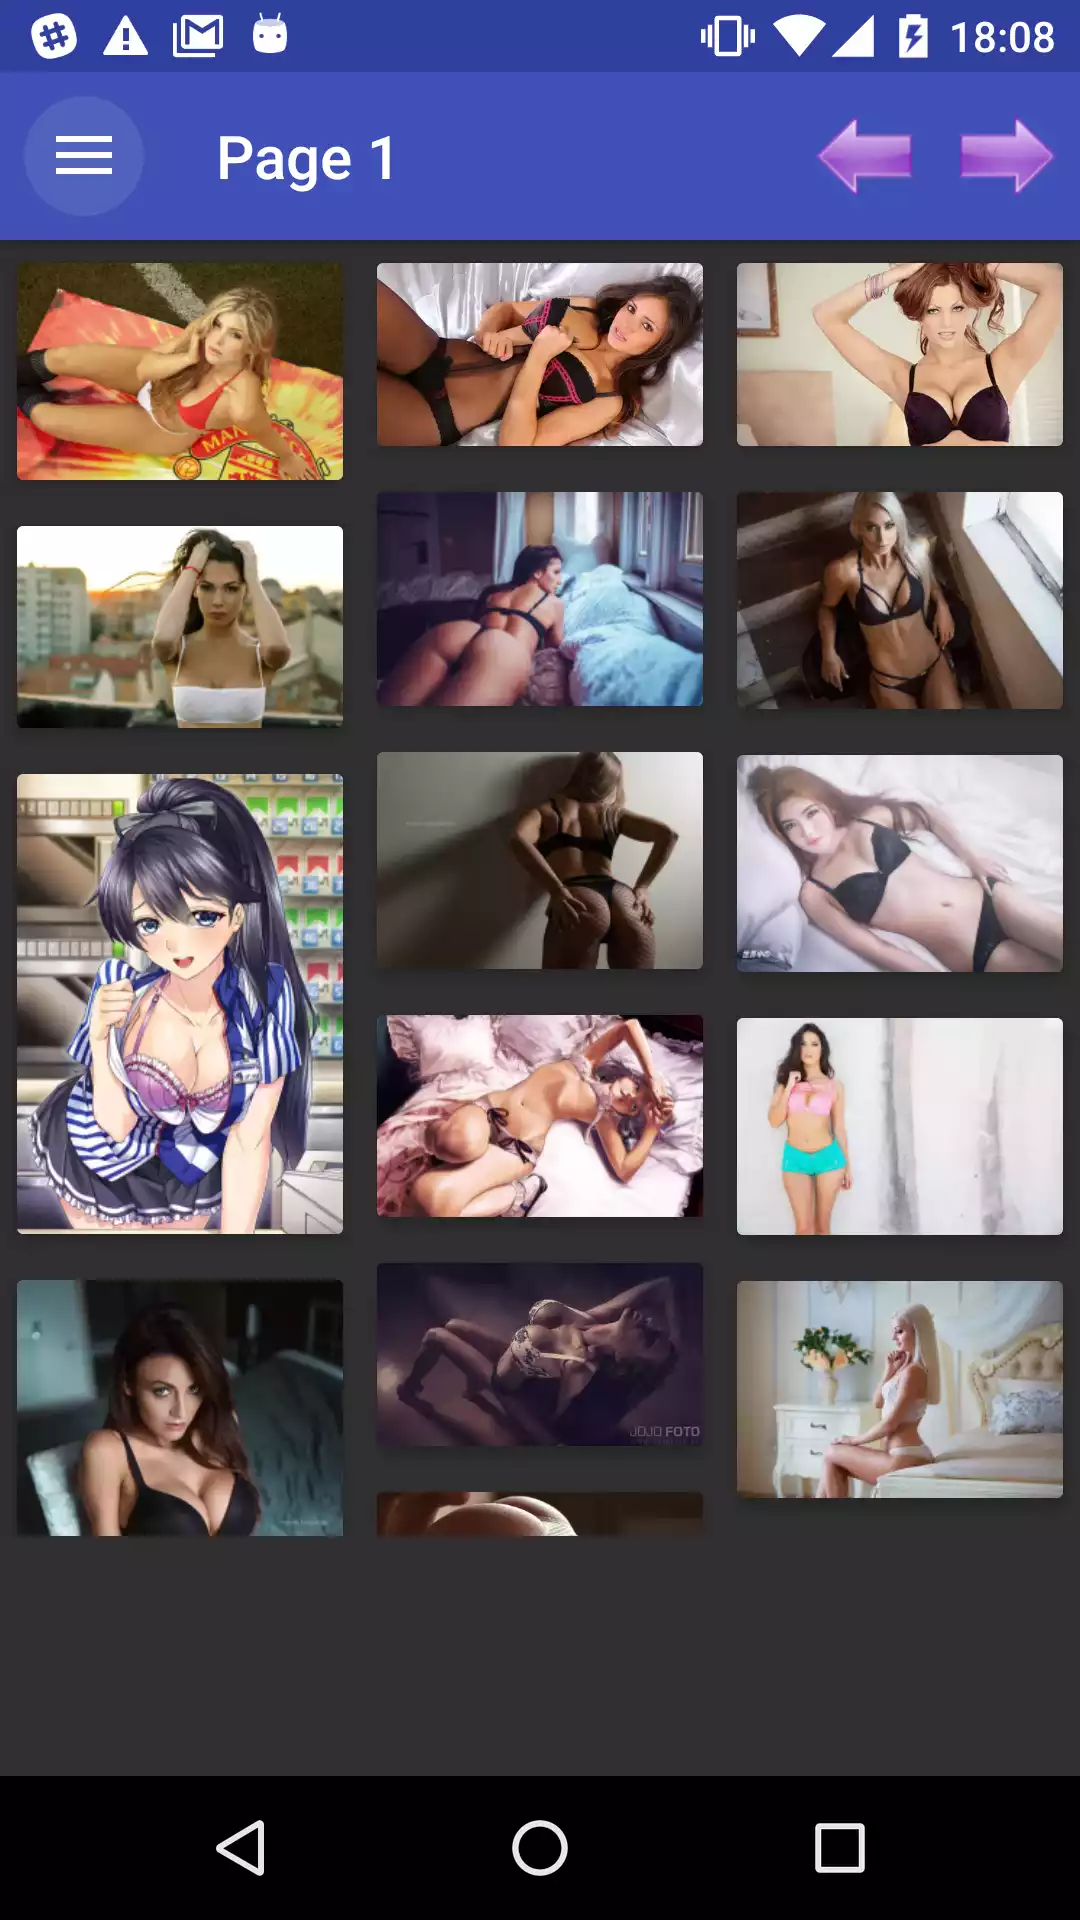 Bra Wallpapers pictires,picture,adult,pornstar,apk,hetai,backgrounds,new,star,photos,wallpapers,pictures,pics,hentai,sexy,for,hintai,application,download,porn,photo,lisa,shemales,play